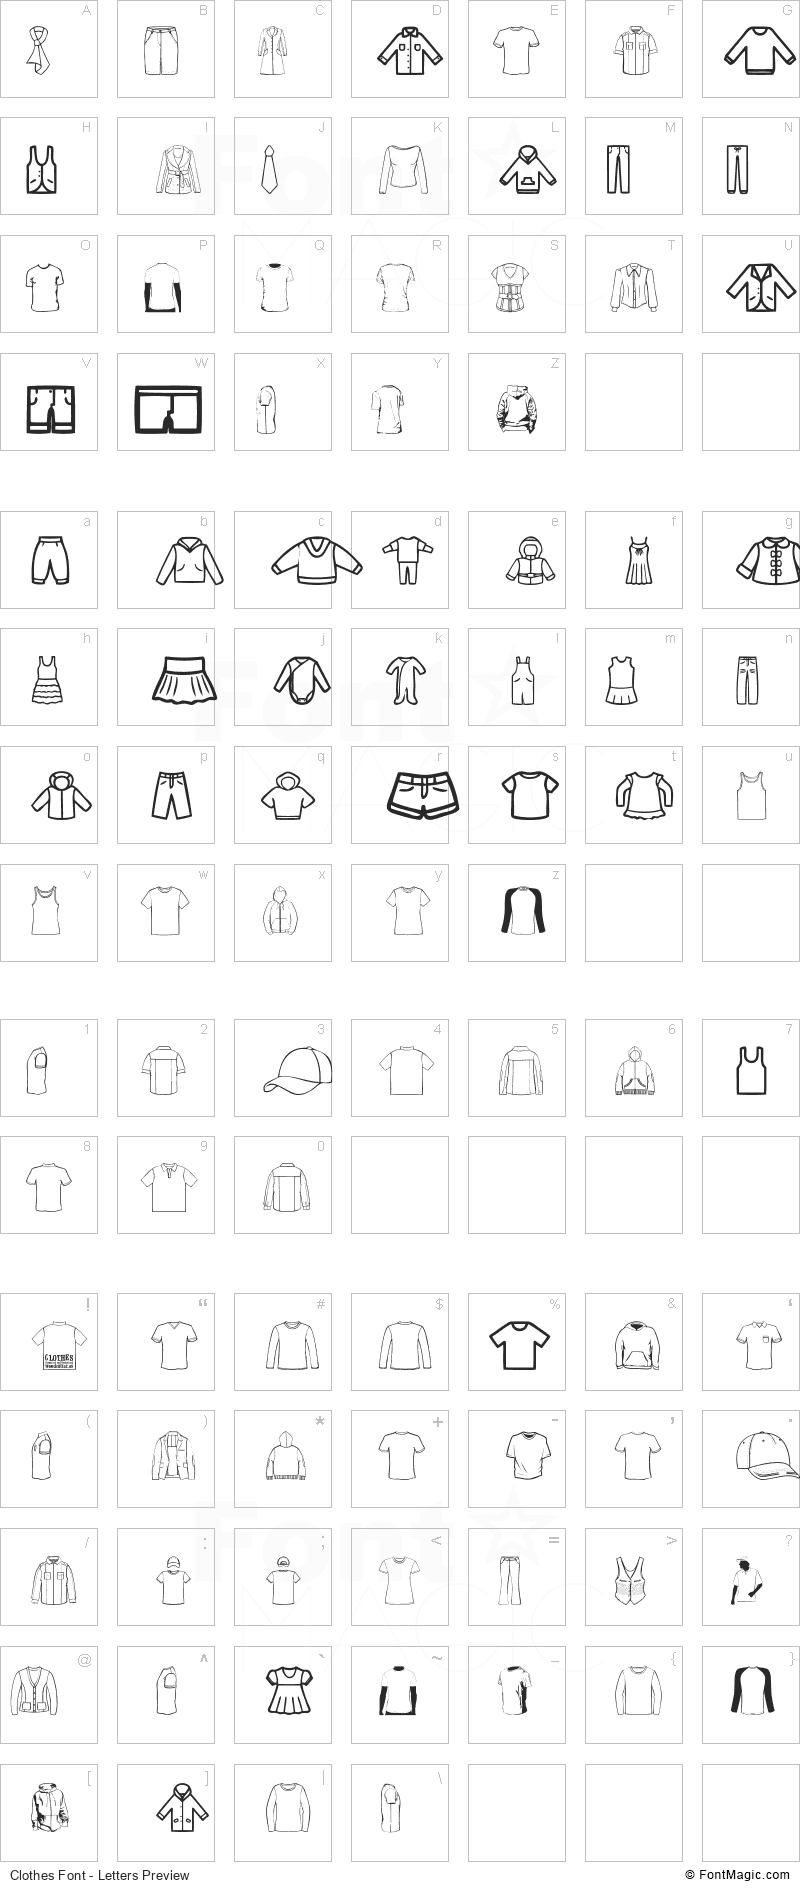 Clothes Font - All Latters Preview Chart